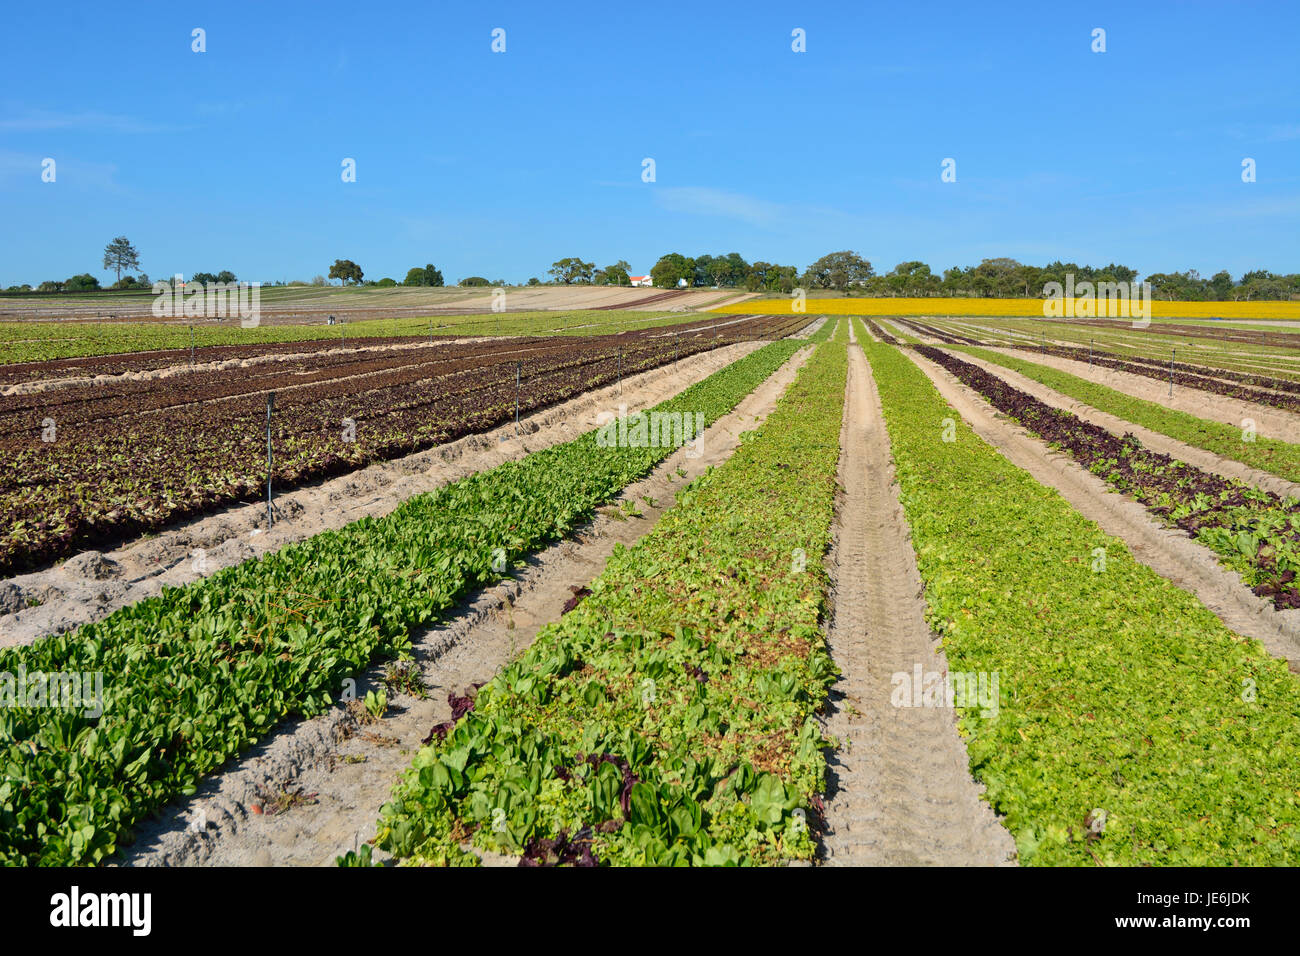 Vegetables in an agricultural field, Melides. Portugal Stock Photo